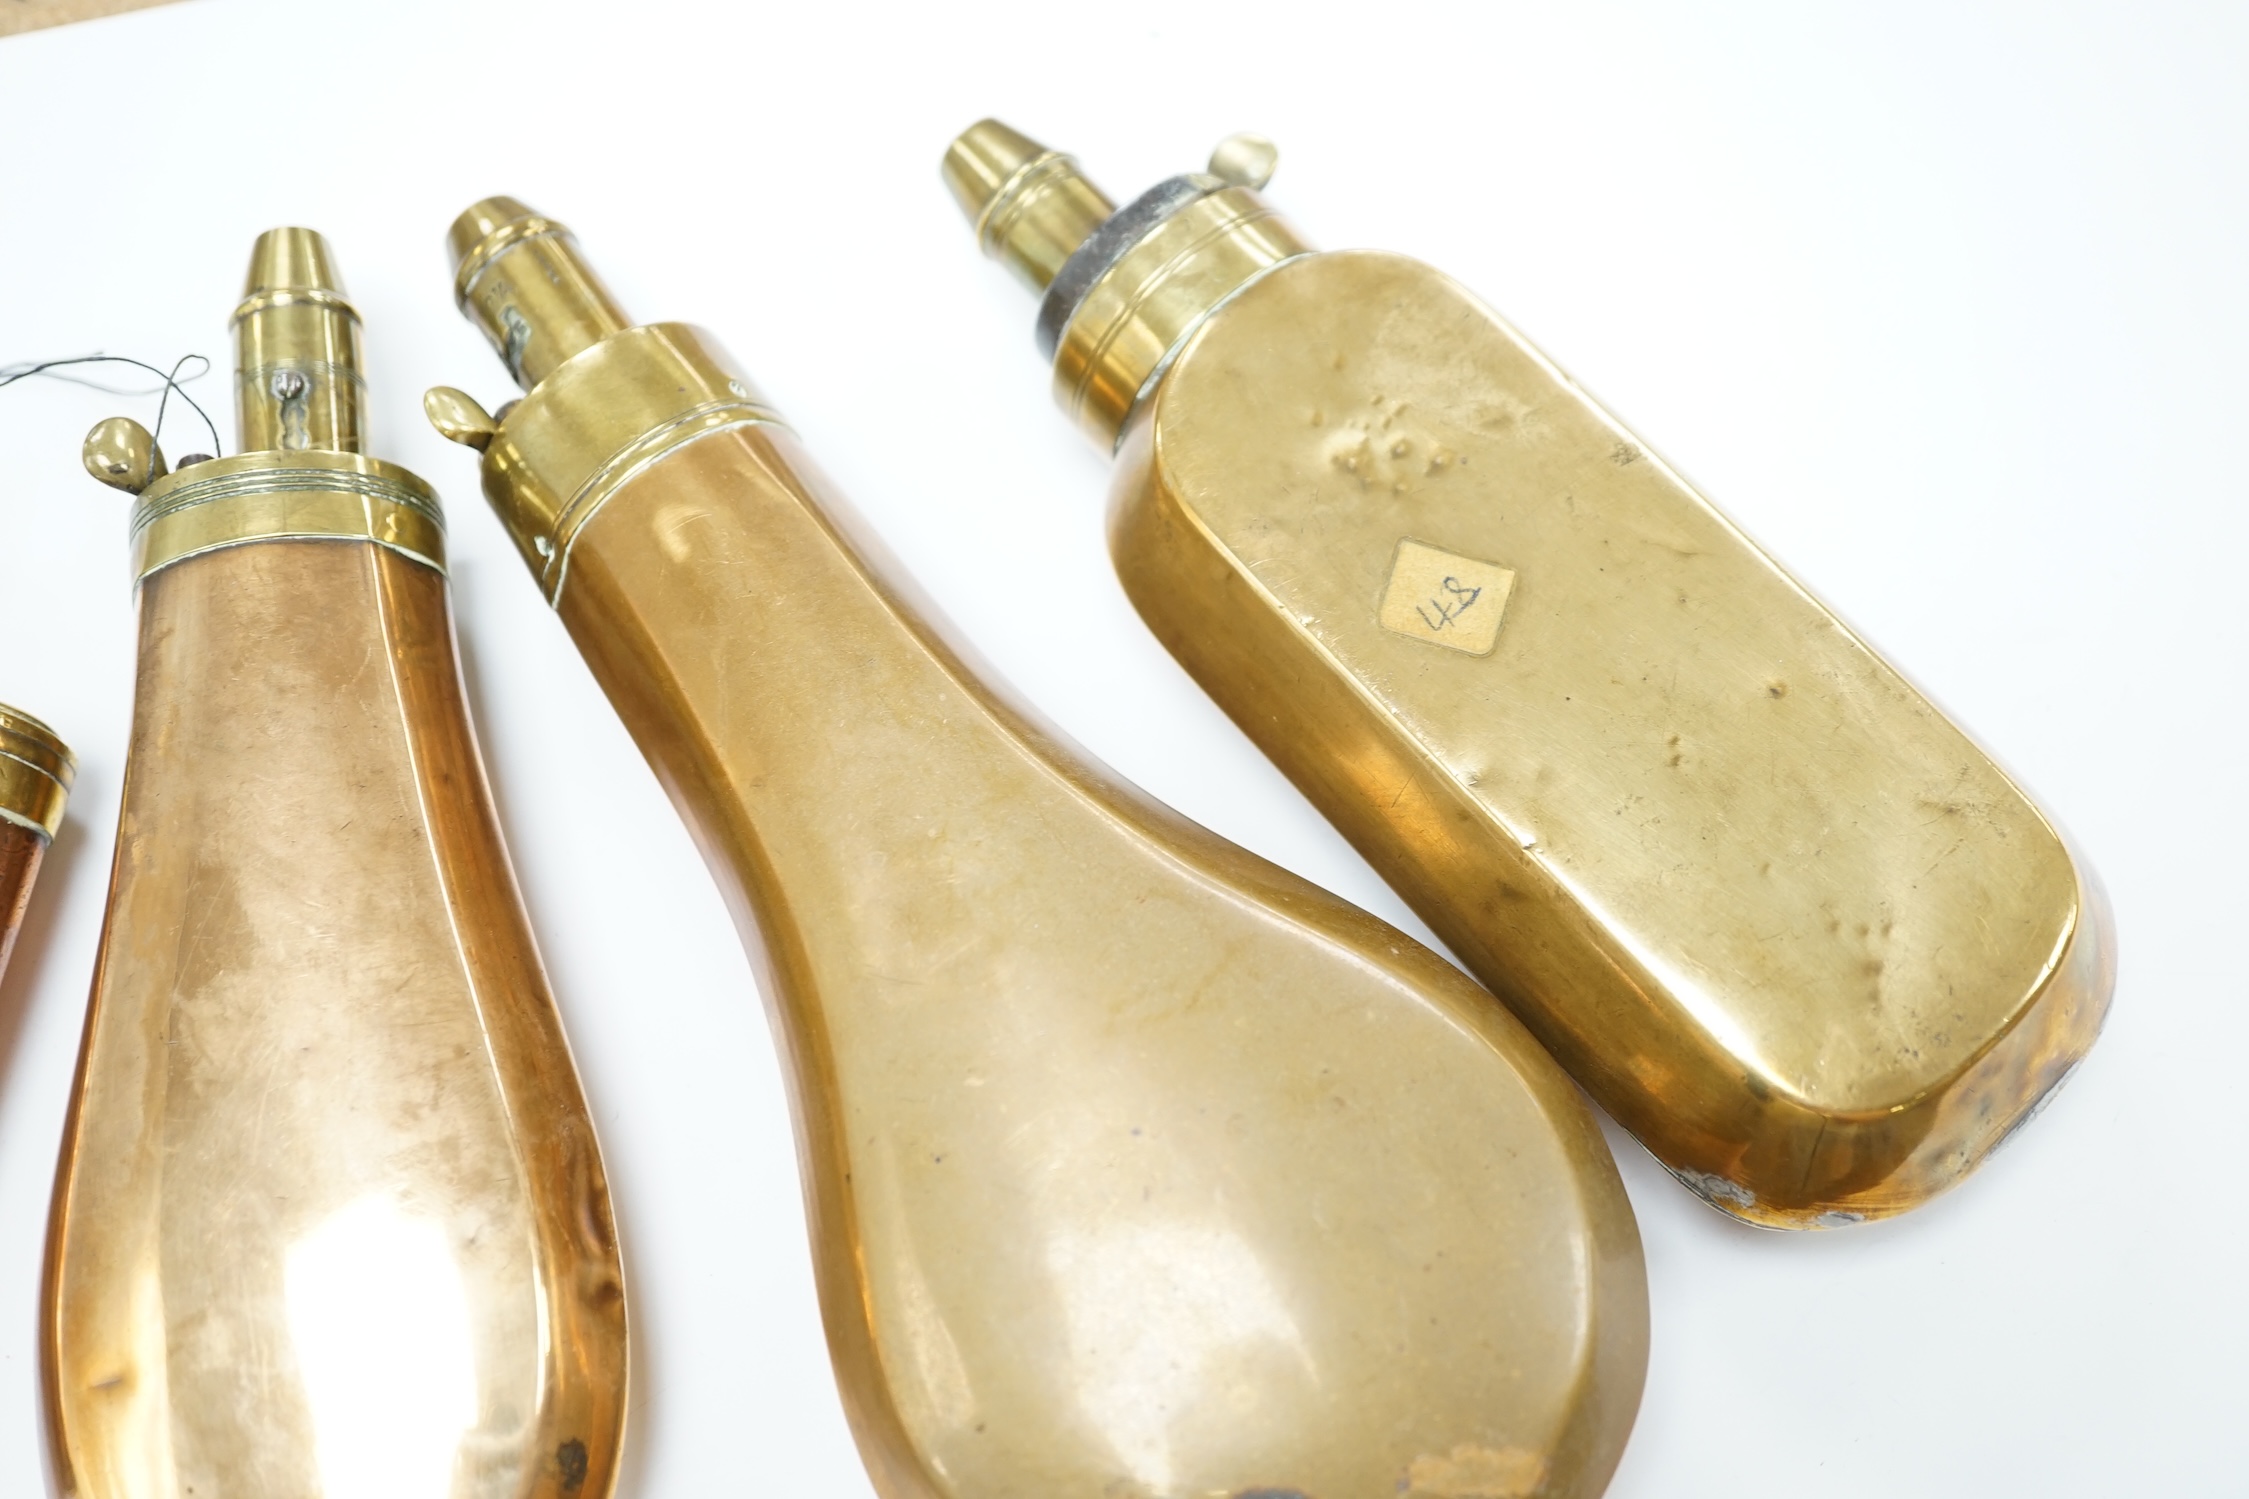 Five 19th century copper and brass powder flasks, all with plain copper bodies. Condition - fair